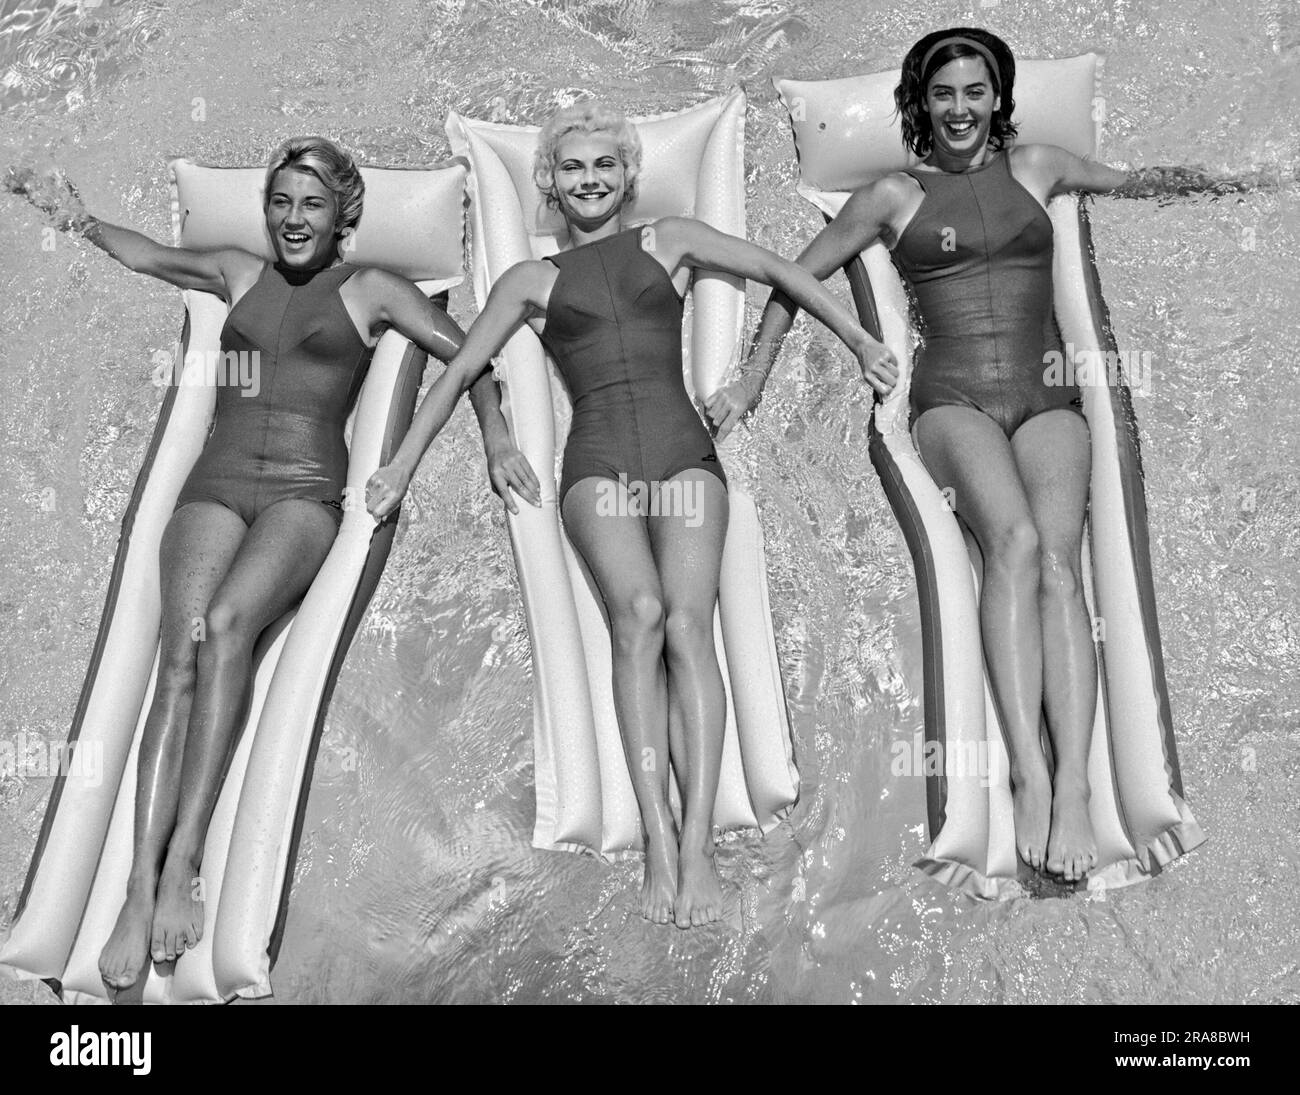 F1 Photograph 3 Handsome Men With Old Time One Piece Bathing Suits Funny